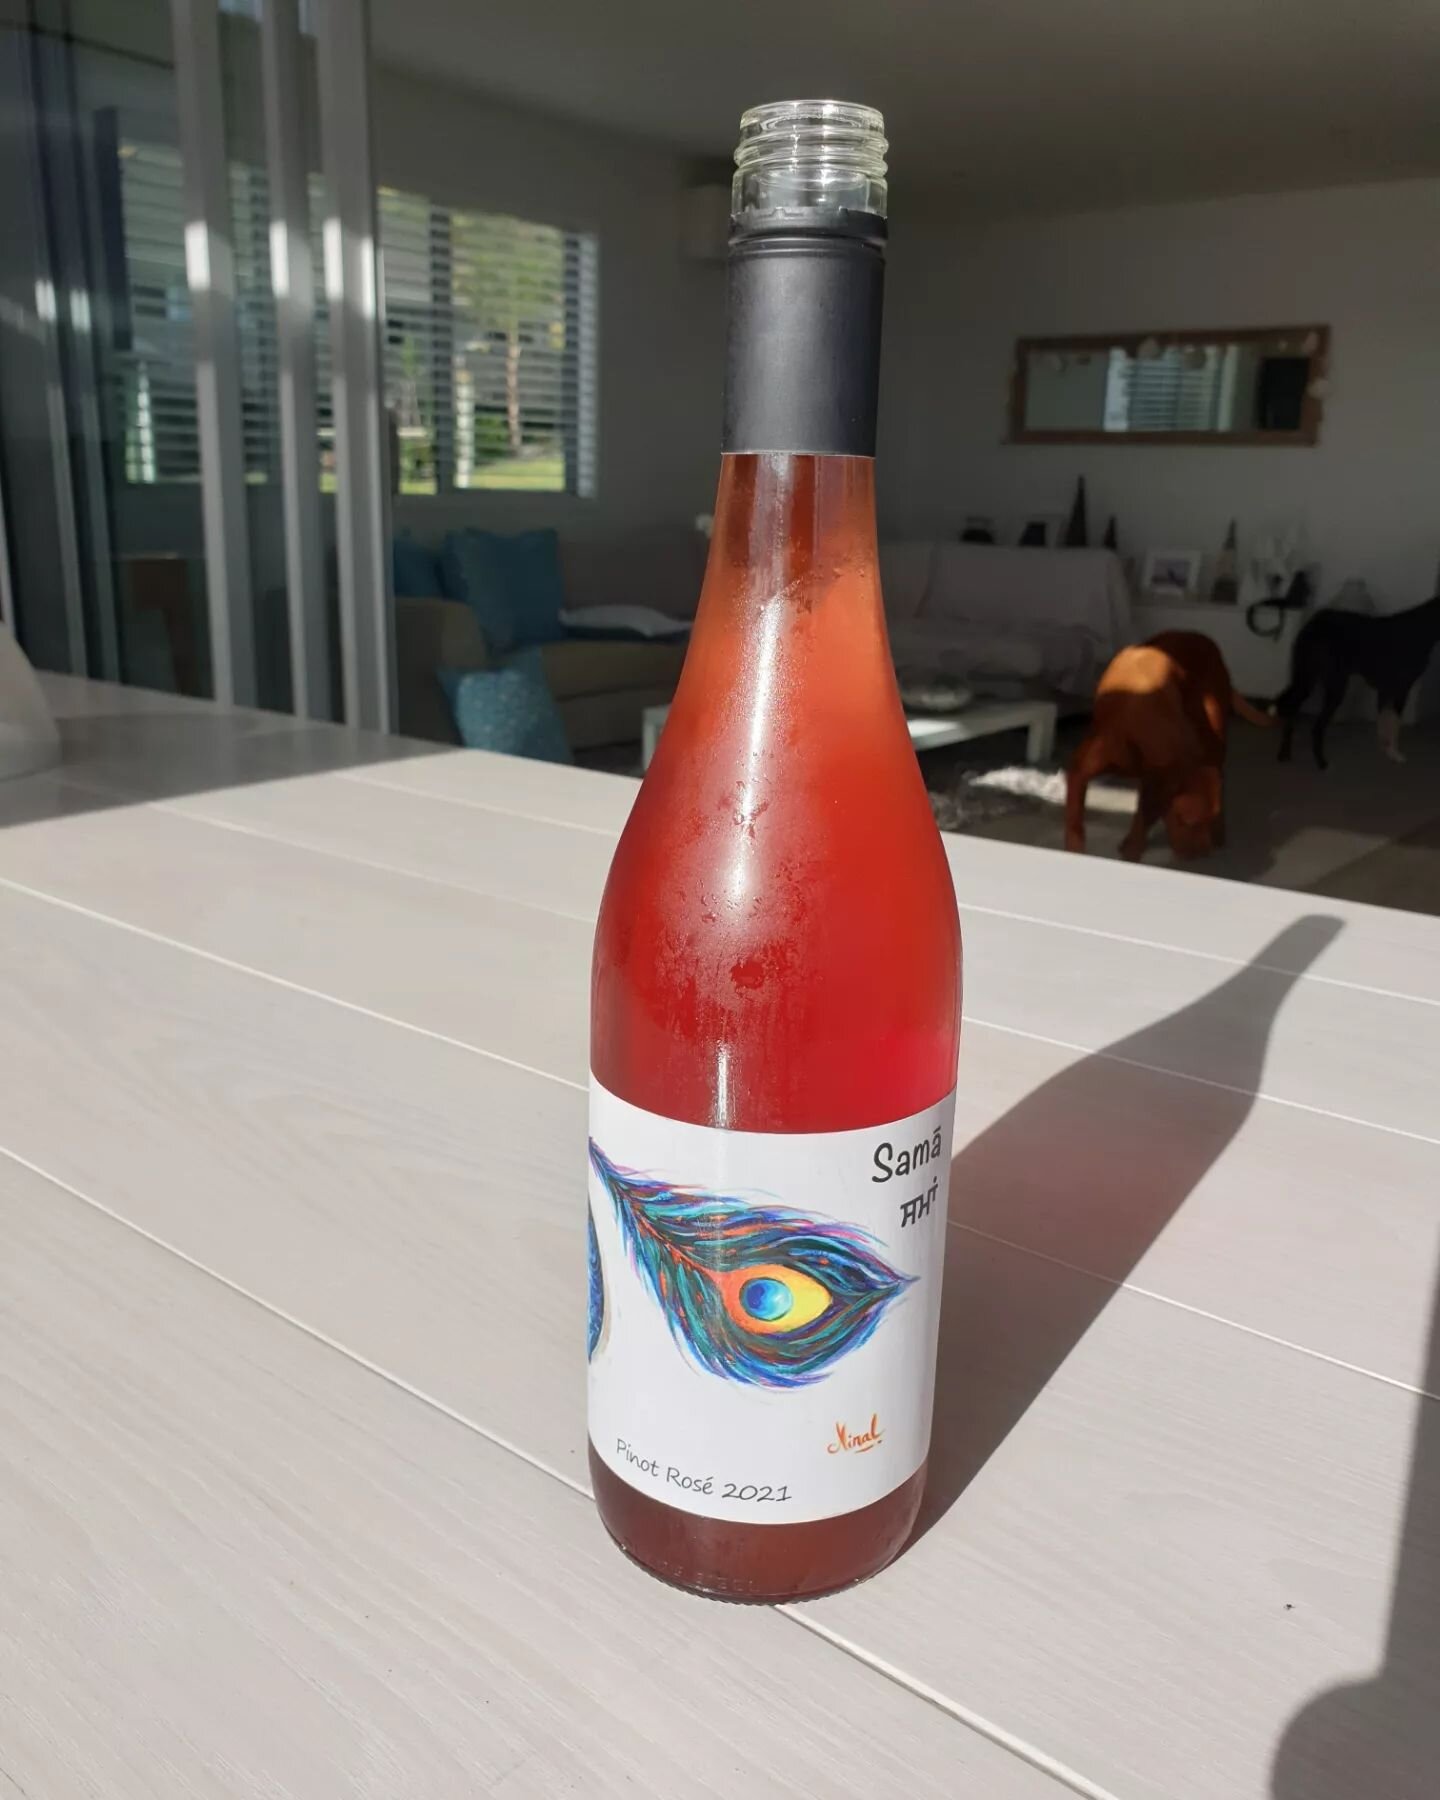 Thank you! @floray.uttam
We had this Pinot Rose with fresh caught sashimi snapper. 

Classic red berries, rhubarb and cherry. Fleshy mid palate framed nicely by plum skin phenolics. Finishes crisp with fine talc like tannins.

Delicious and moreish! 